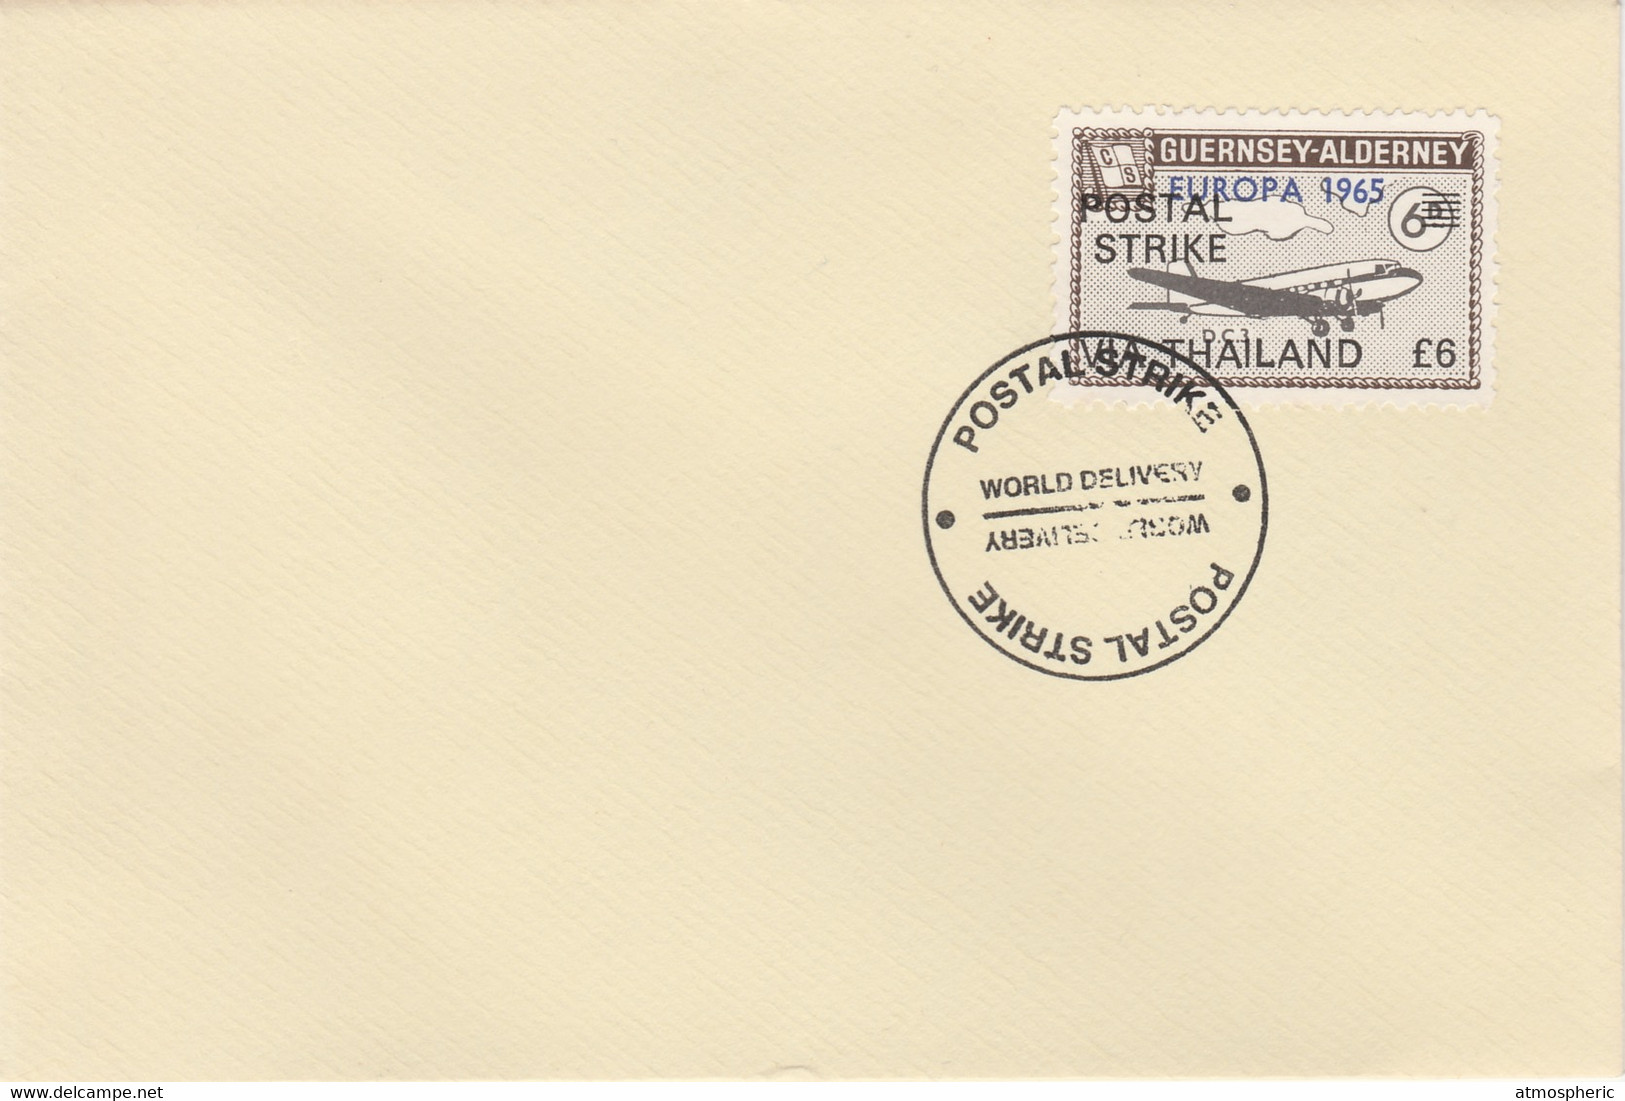 Guernsey - Alderney 1971 Postal Strike Cover To Thailand Bearing DC-3 6d Overprinted Europa 1965 - Unclassified